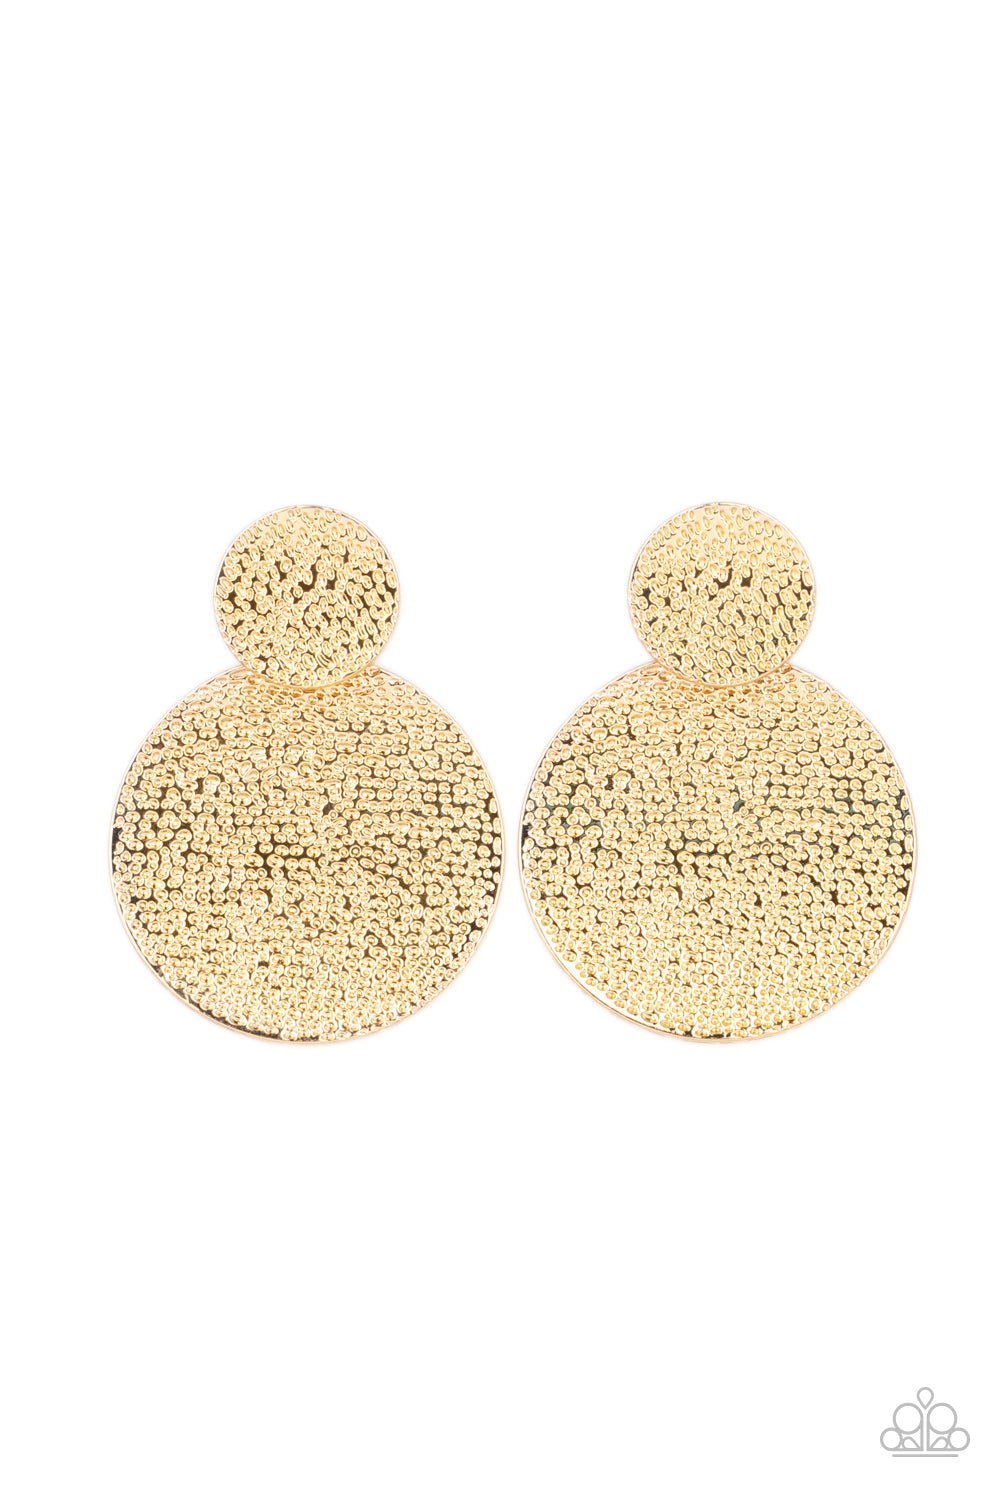 Paparazzi Accessories Refined Relic - Gold Earrings - Lady T Accessories